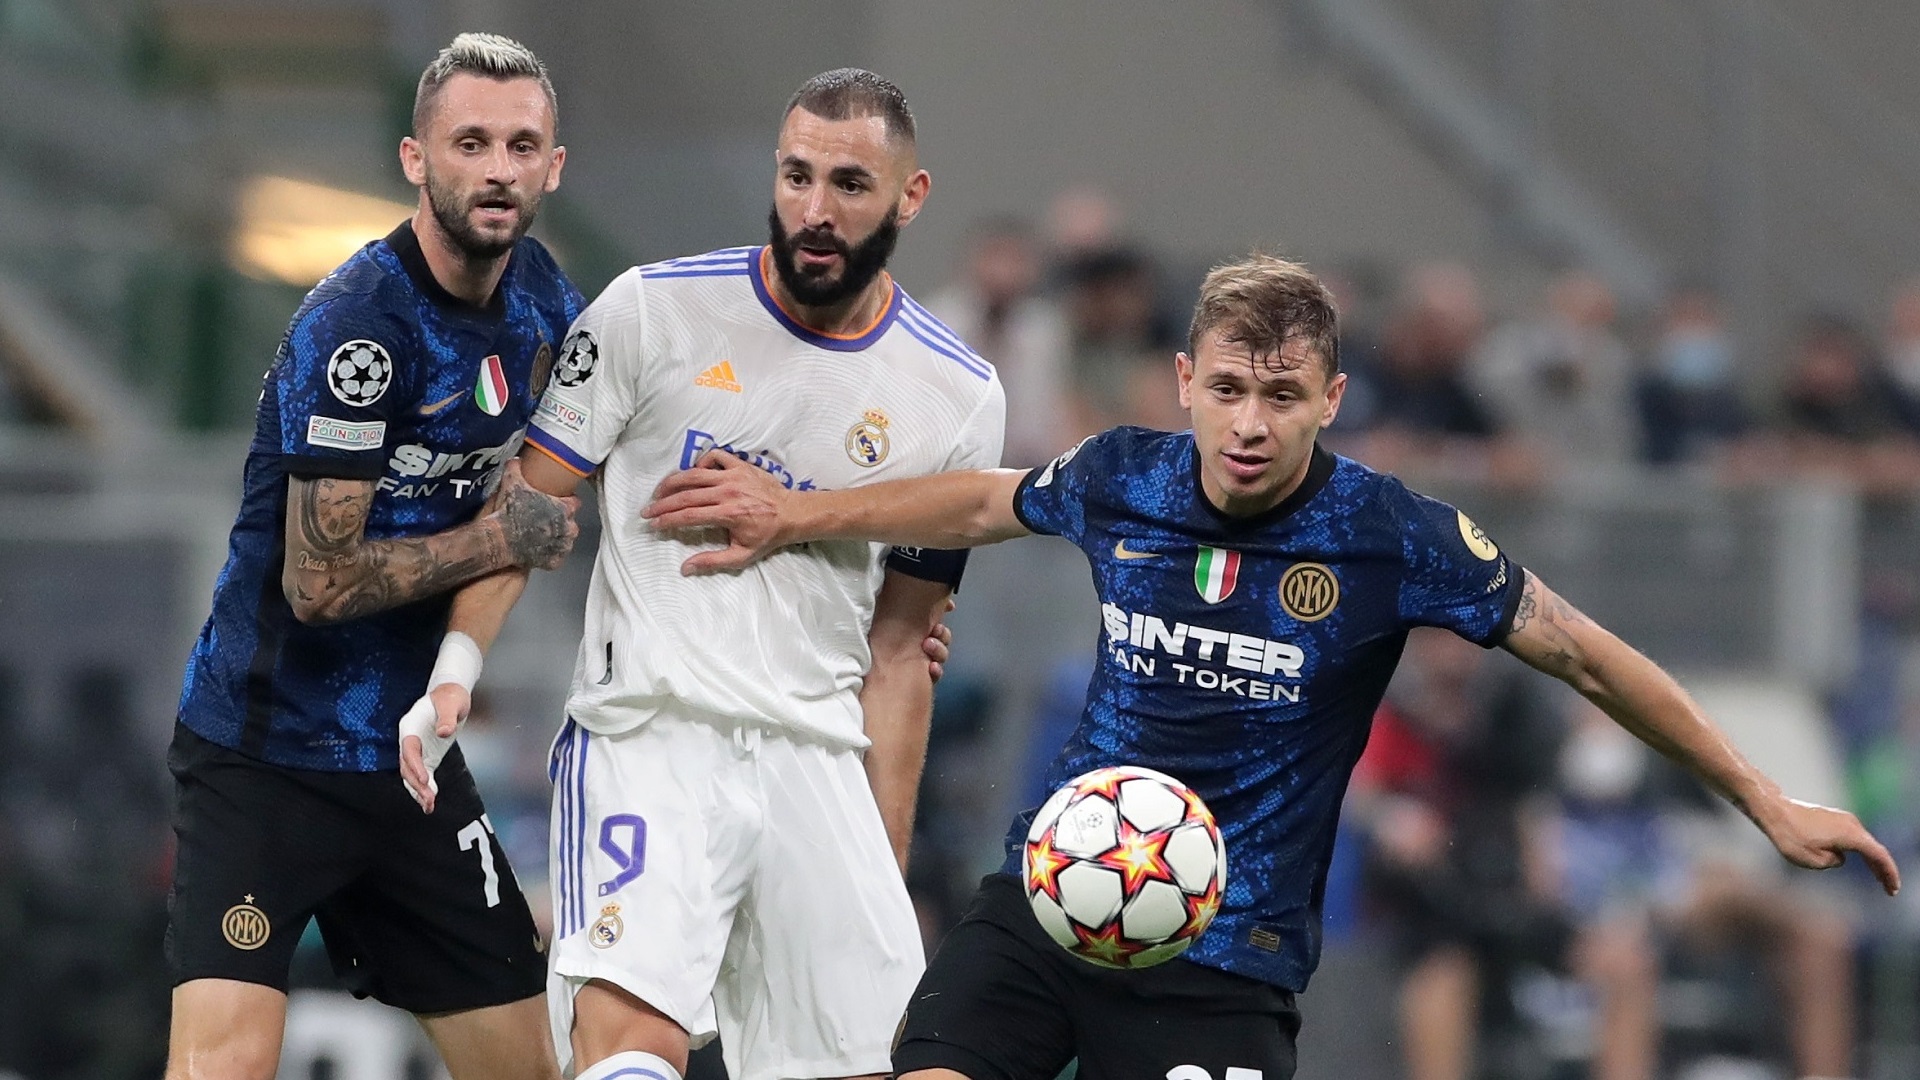 Champions League: Inter-Real Madrid 0-1, le foto